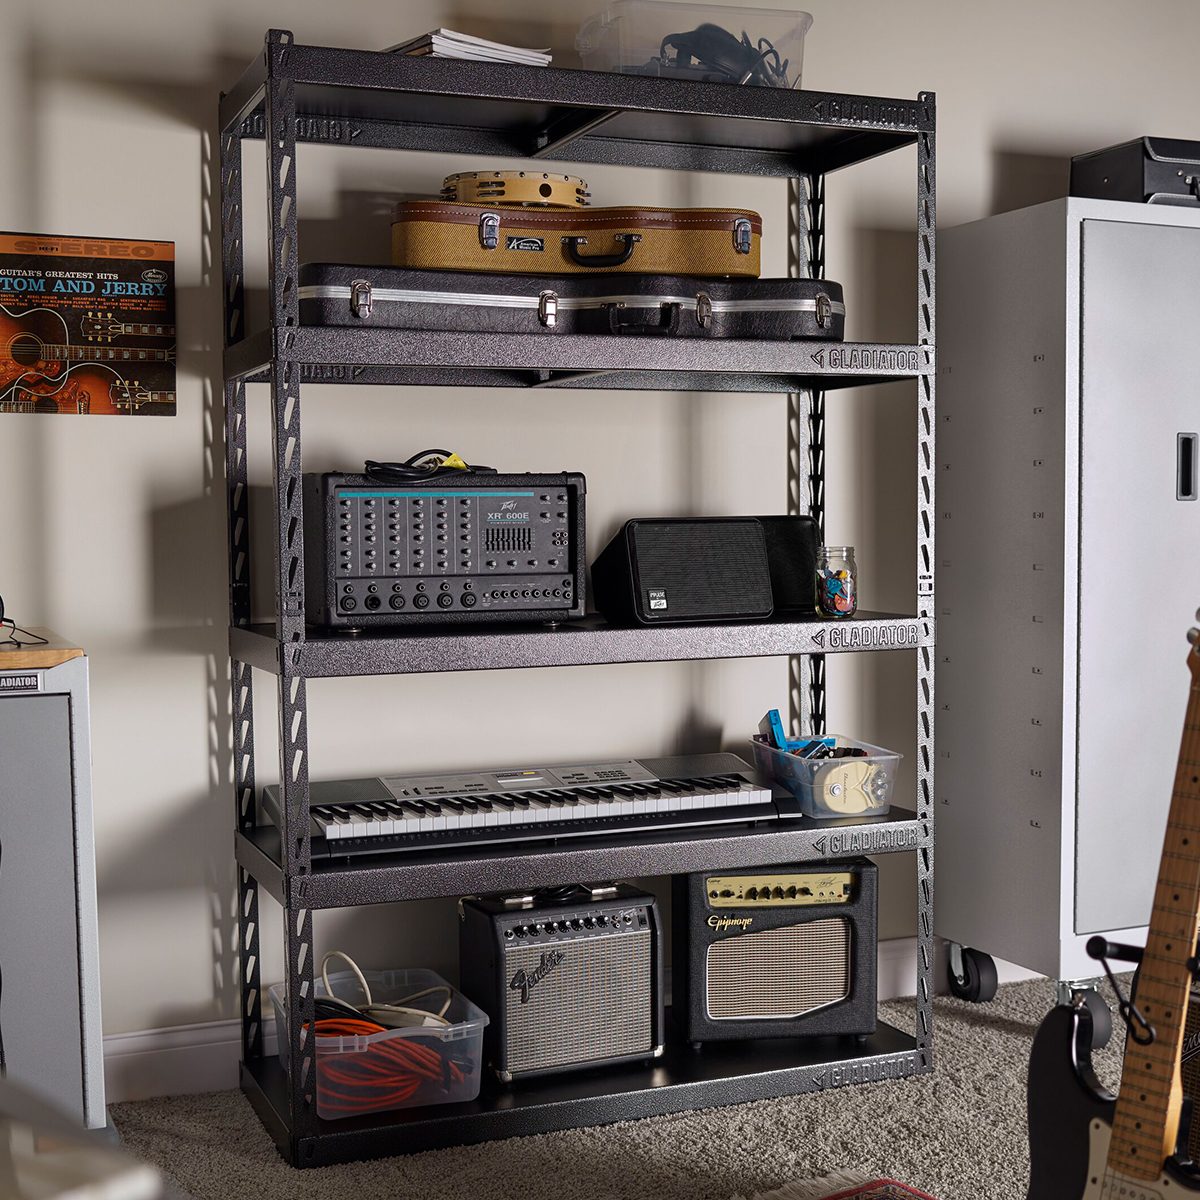 Need to Organize Your Gear? Get a Gorilla Rack